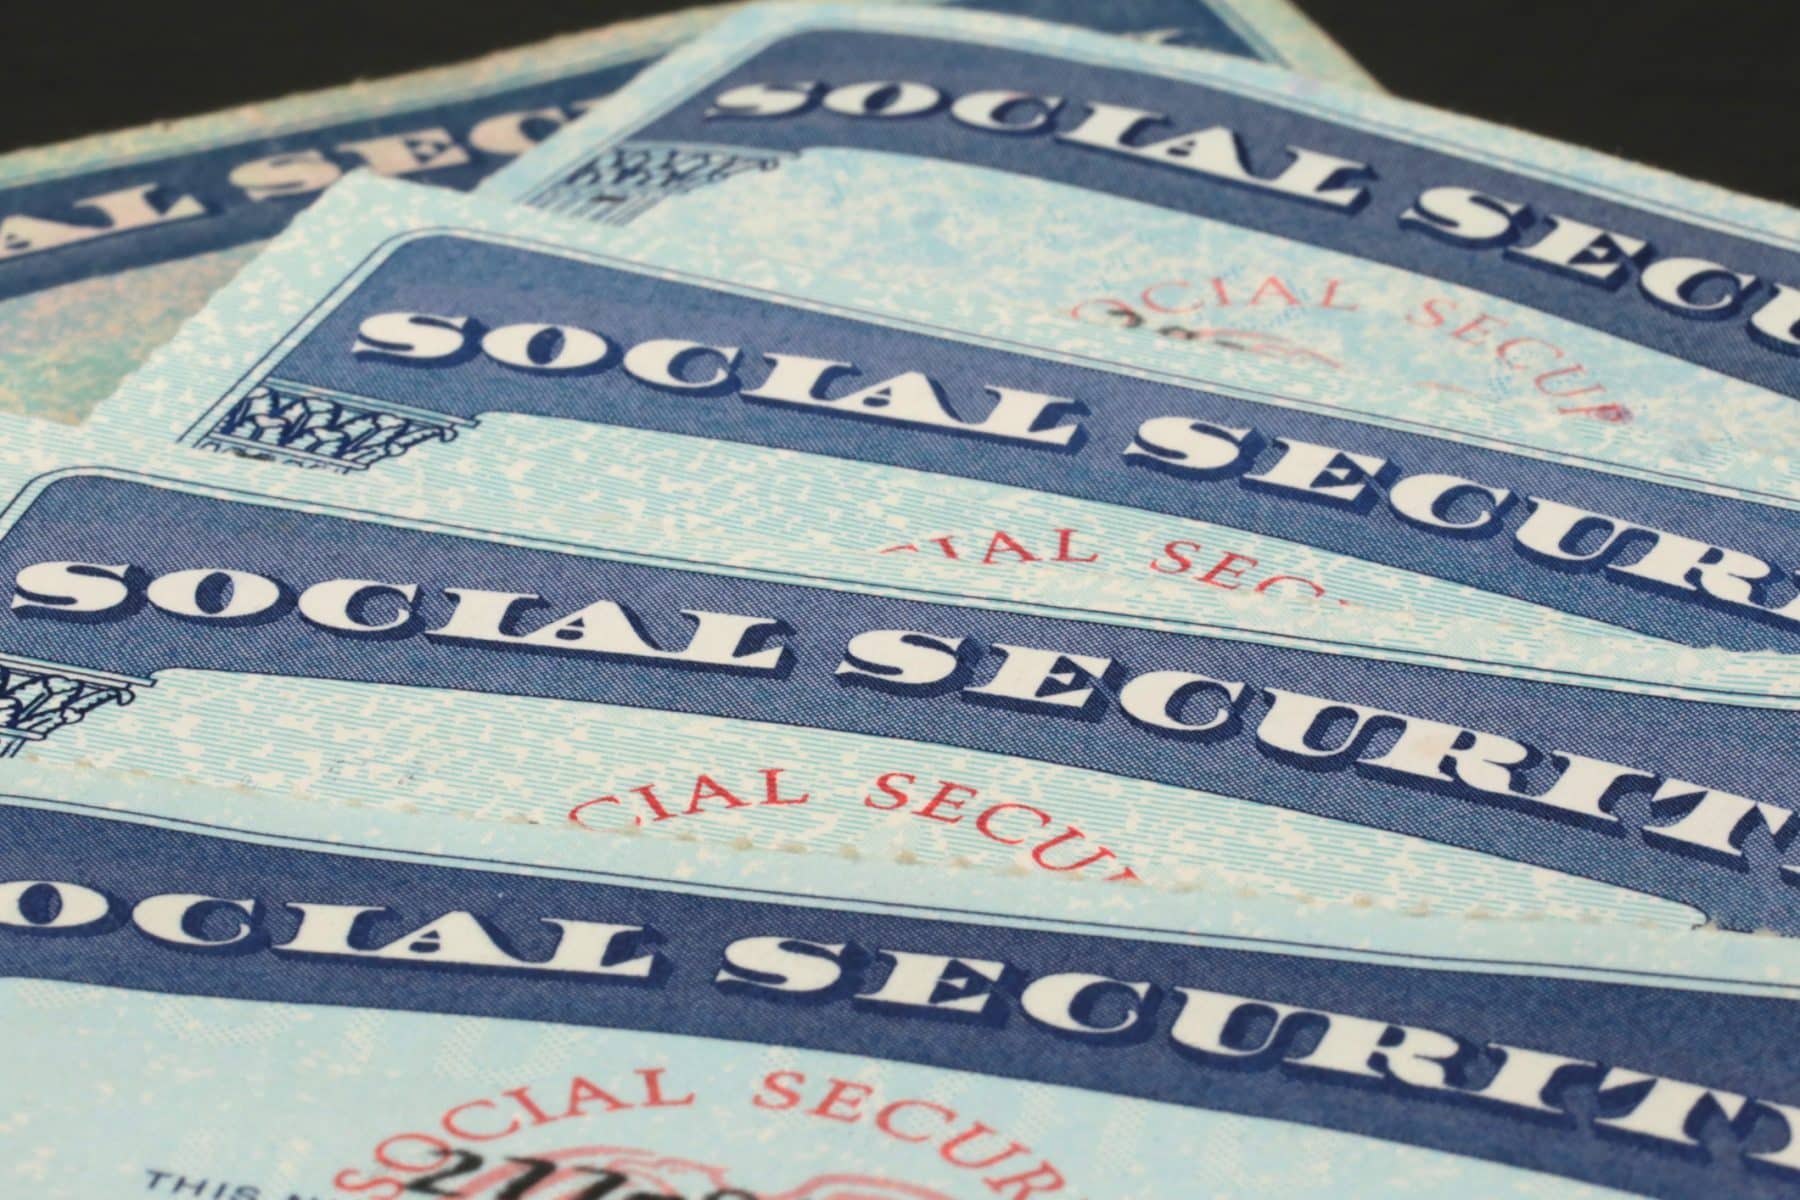 Multiple social security cards are positioned in a row.